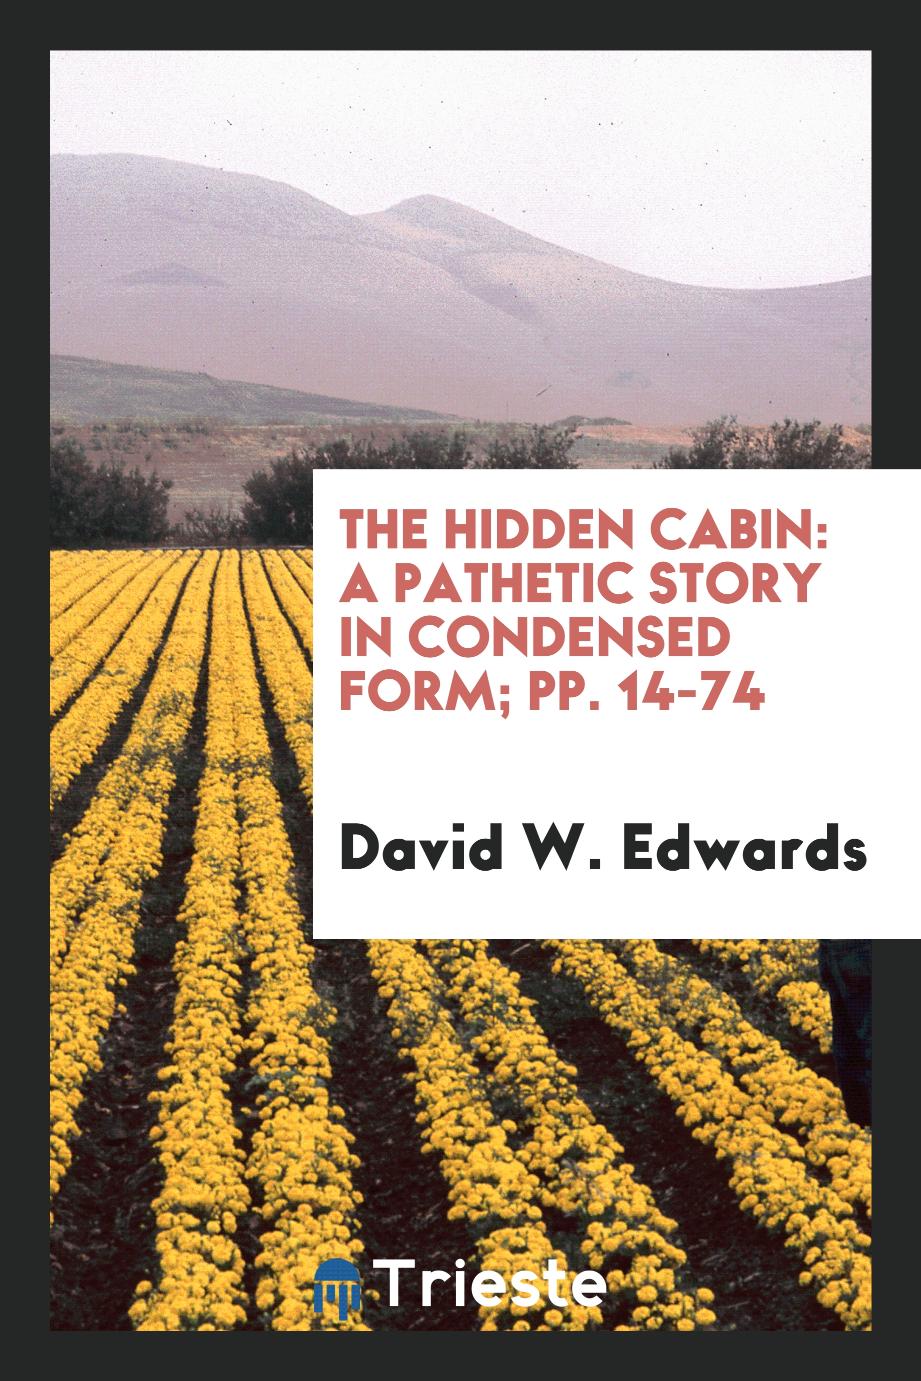 The Hidden Cabin: A Pathetic Story in Condensed Form; pp. 14-74